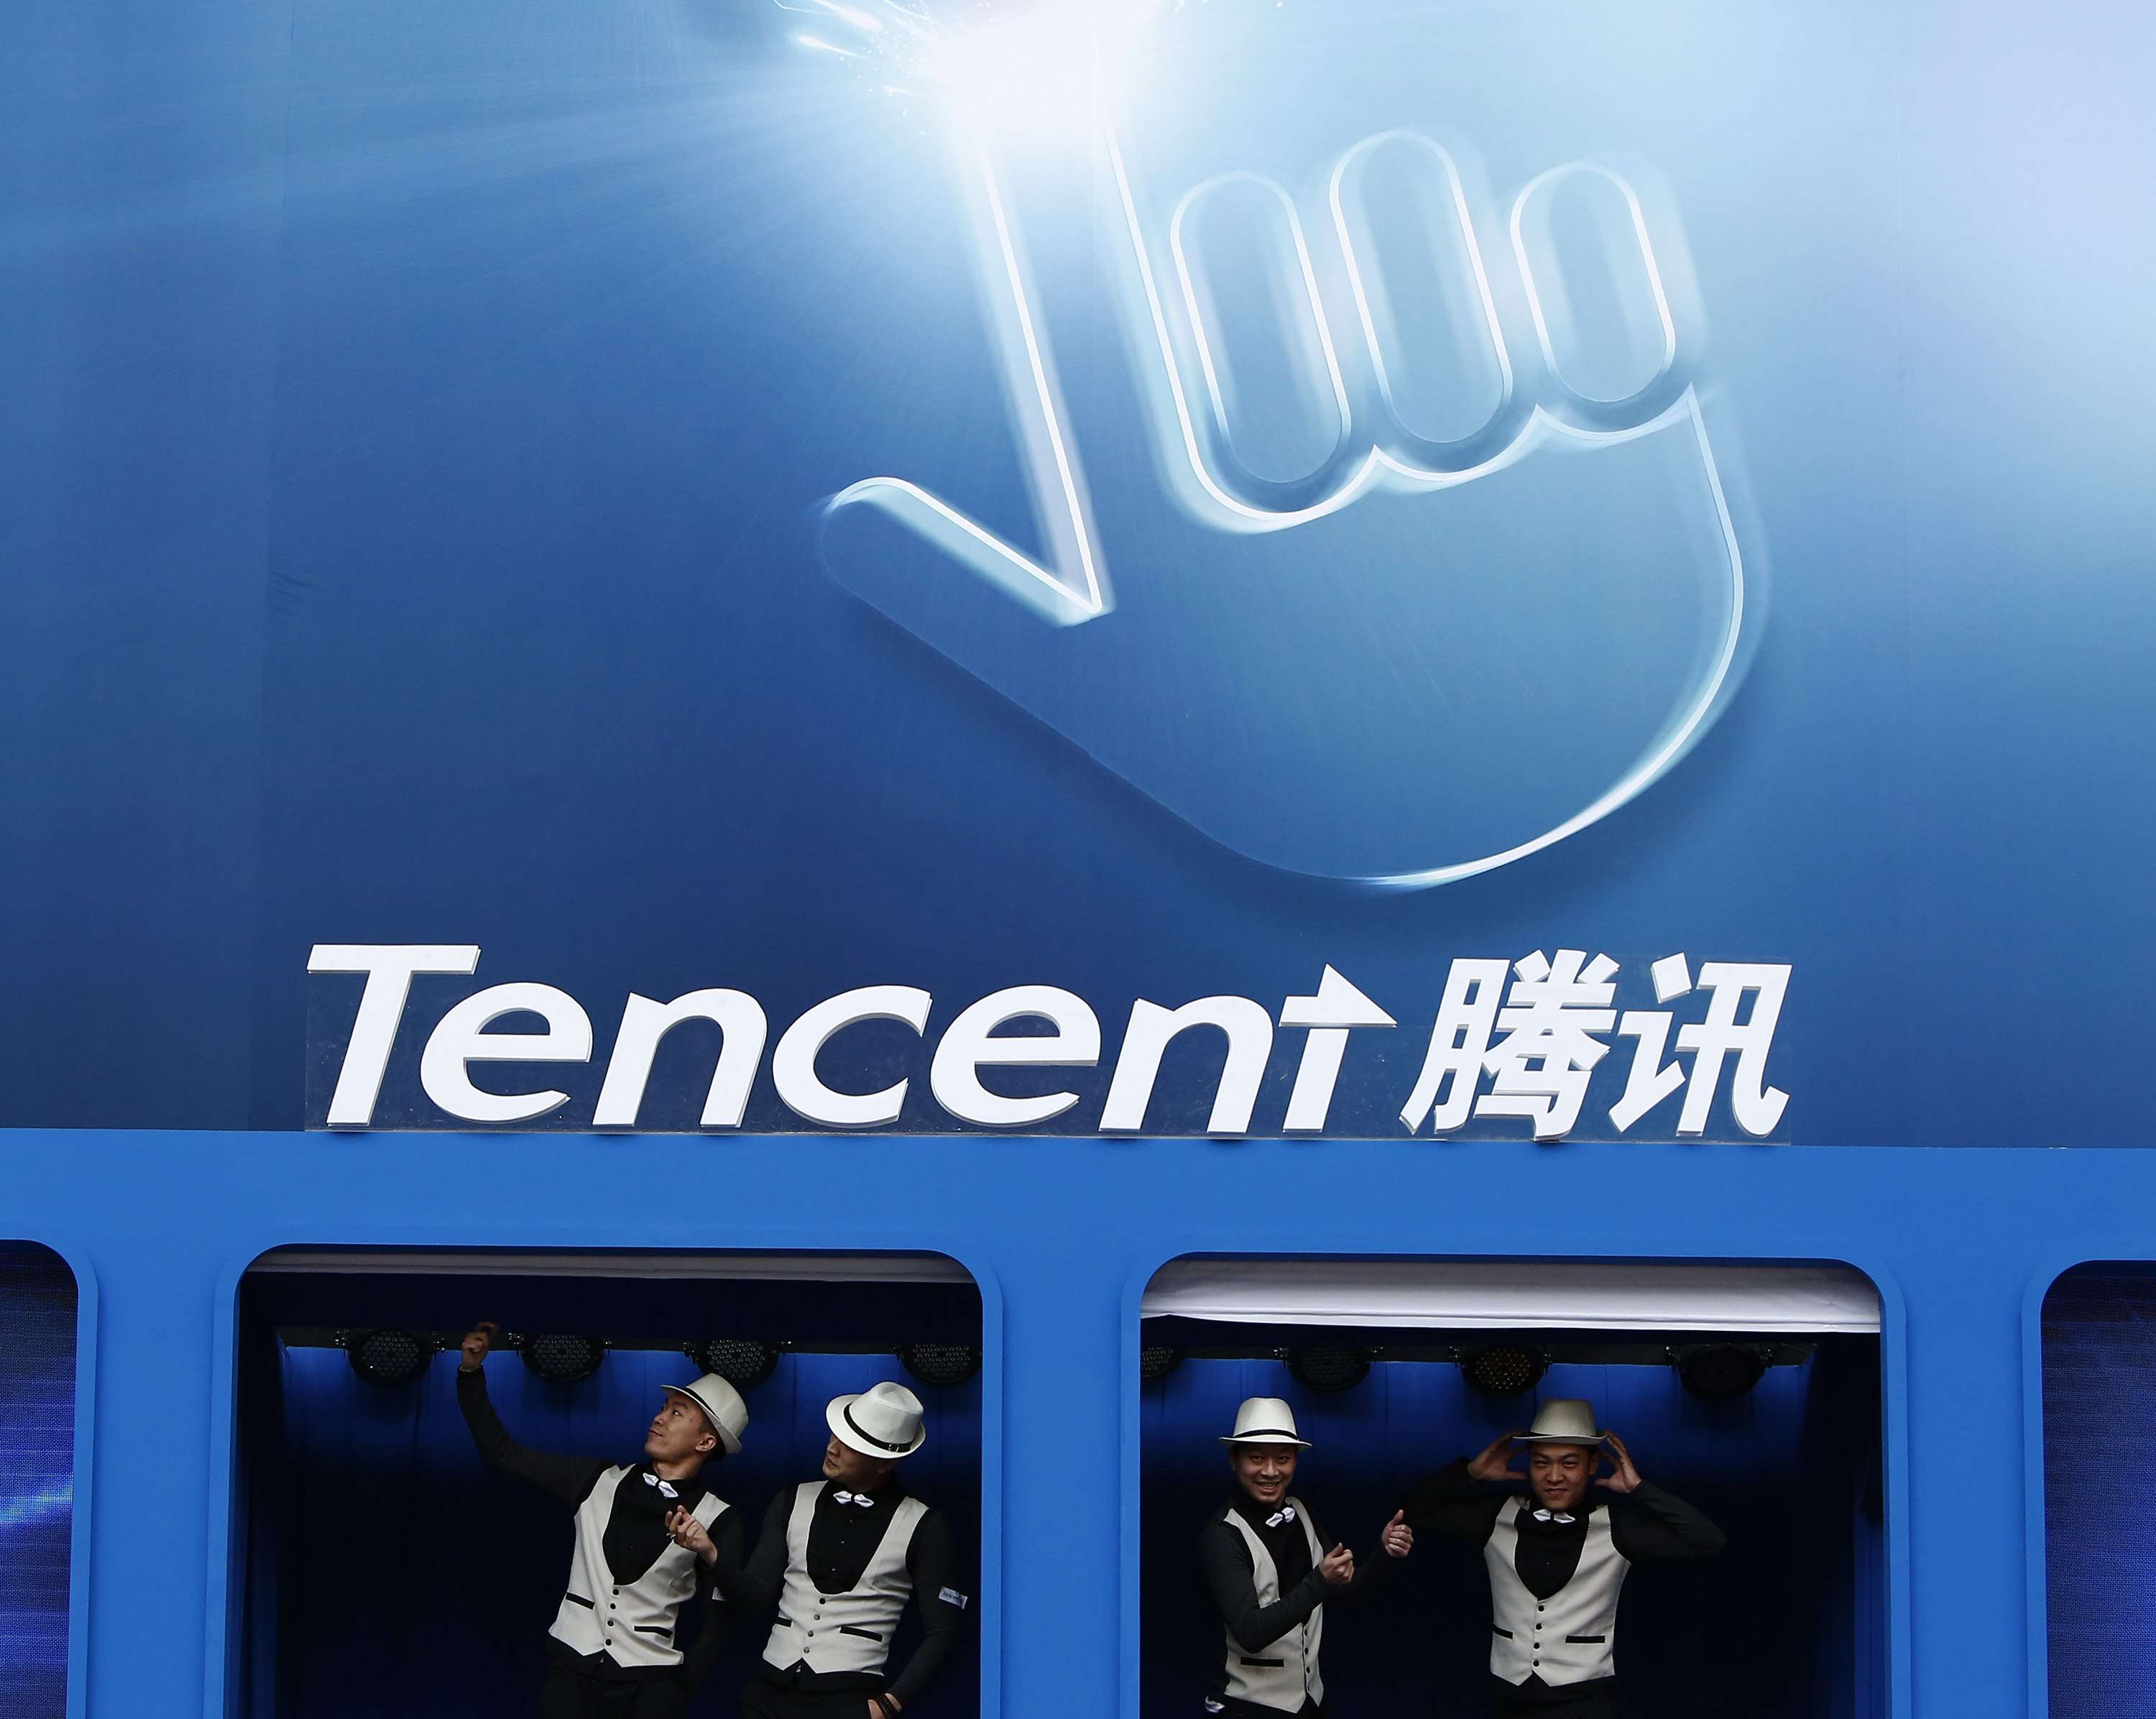 Tencent, which runs China’s most popular social media platforms QQ and WeChat, saw mobile platforms account for 80 per cent of total advertising revenue during the quarter. Photo: Reuters